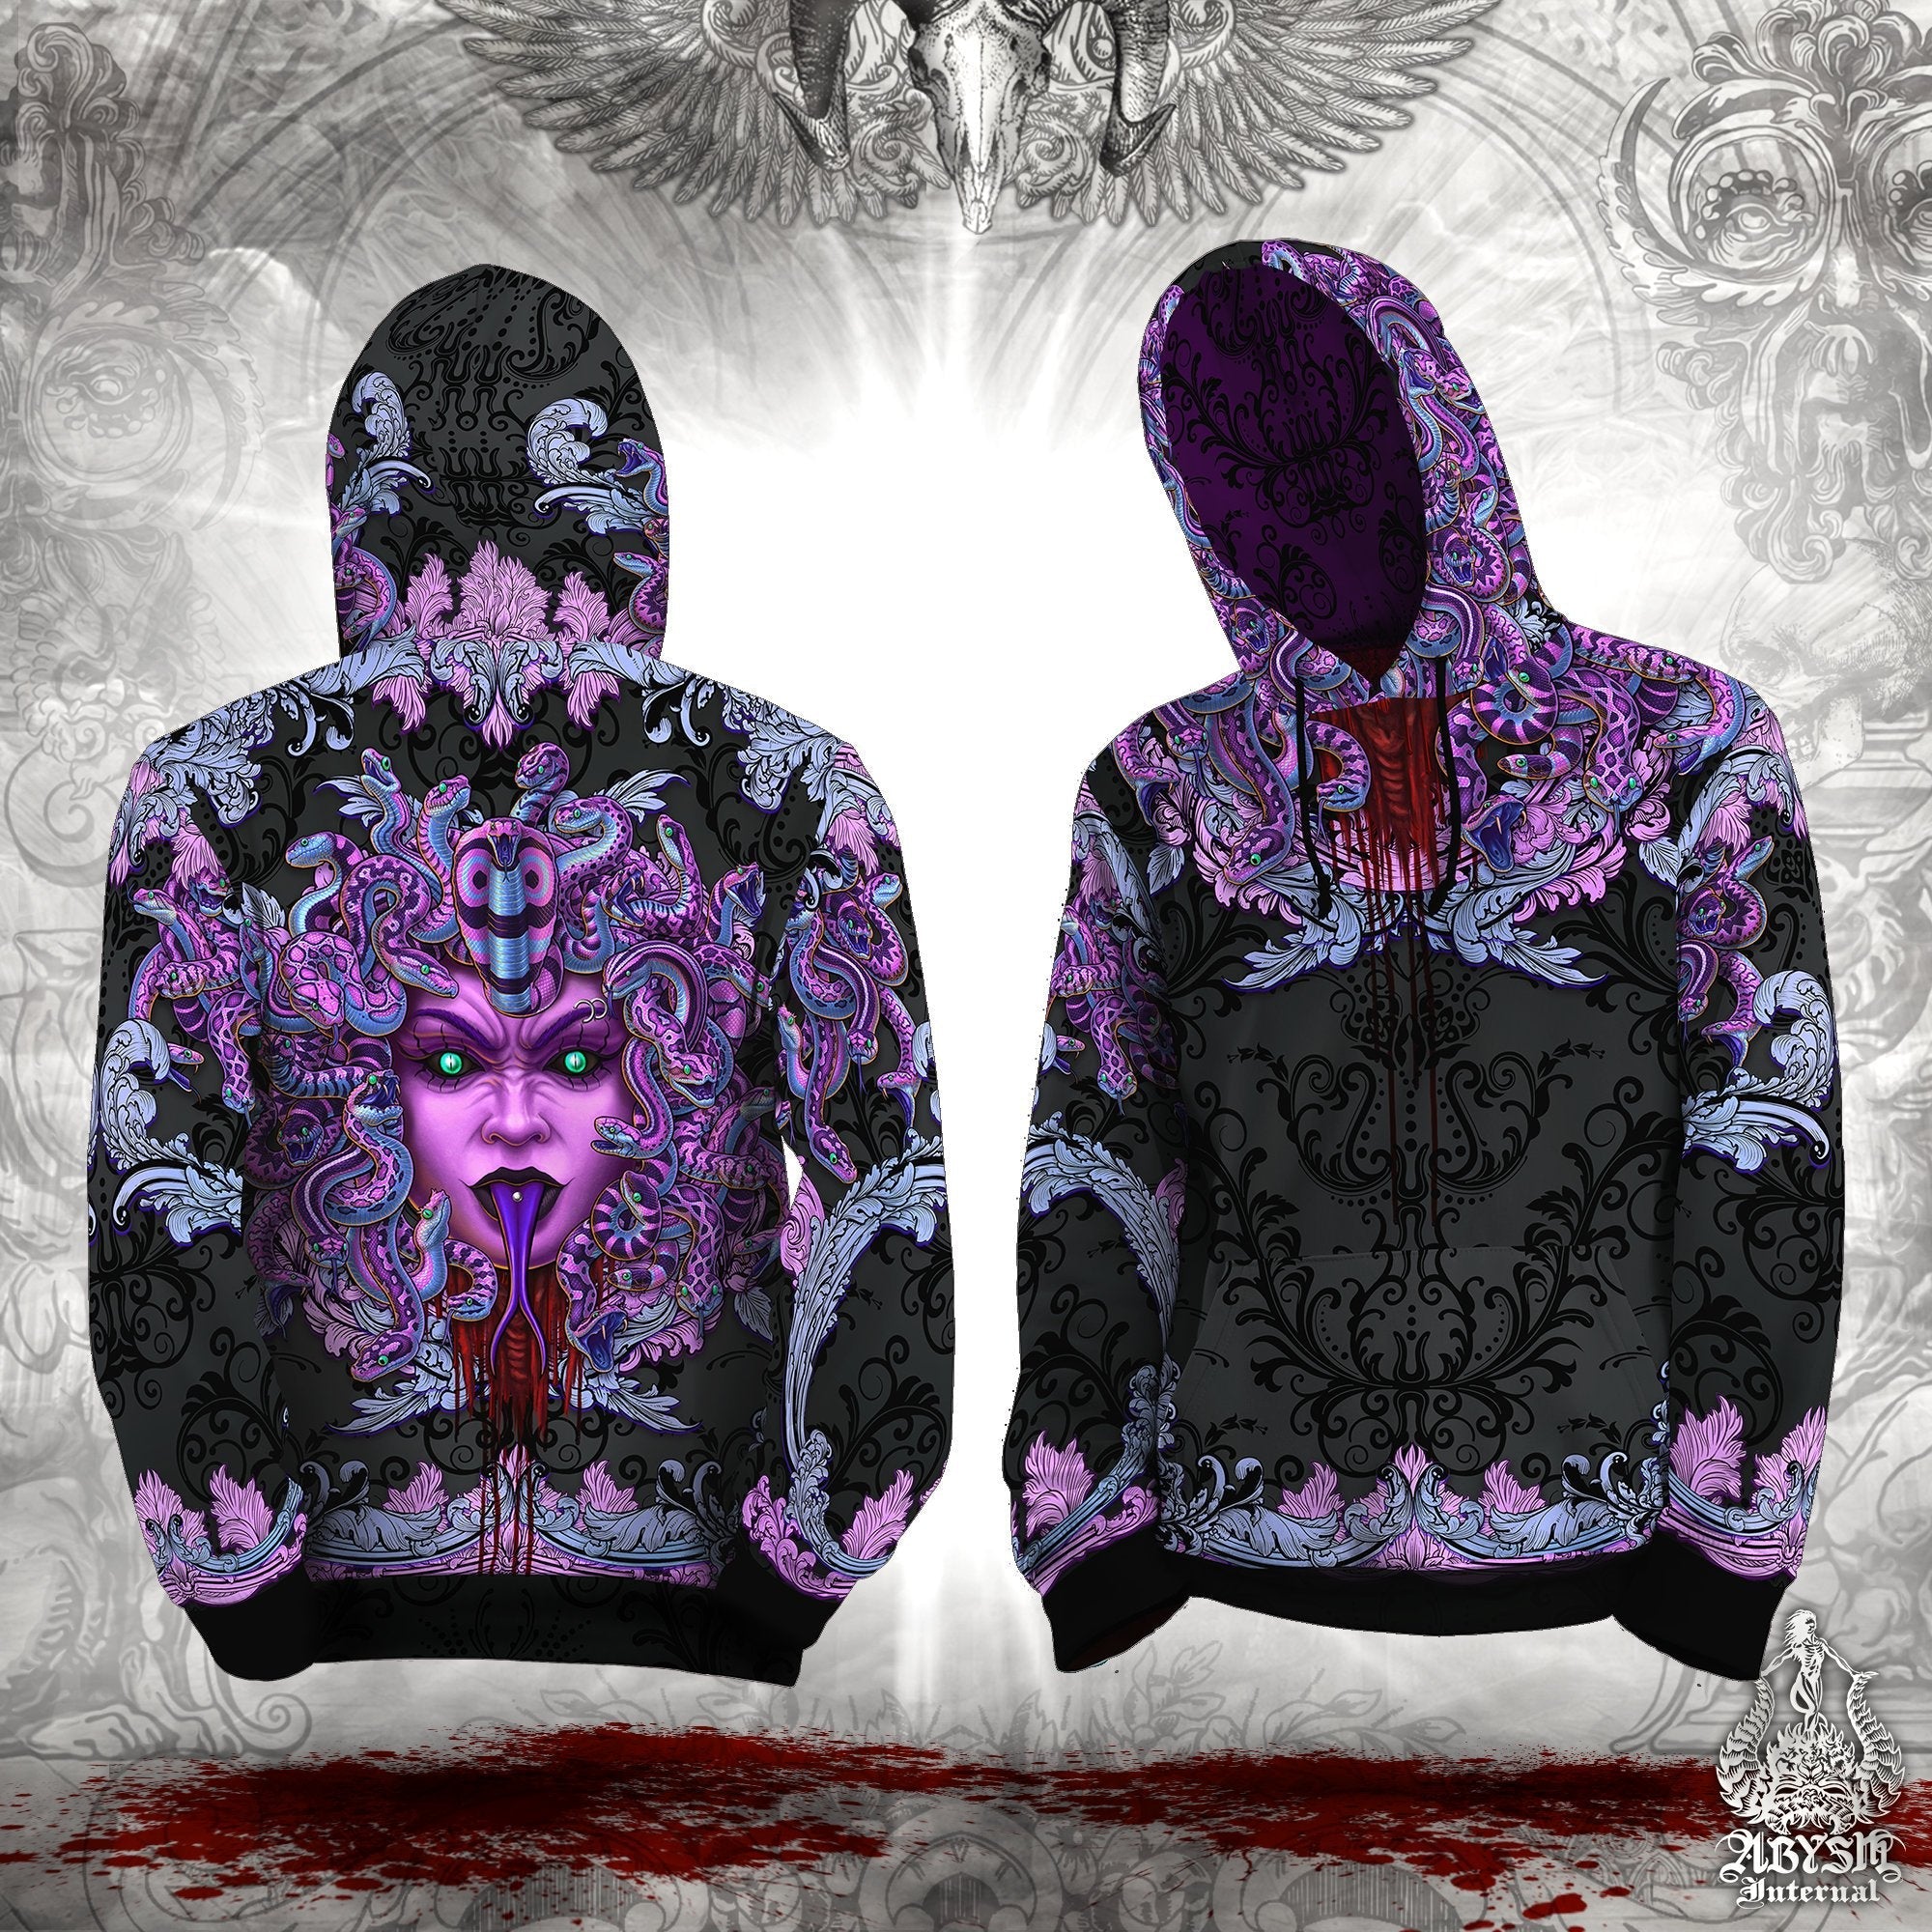 Pastel Goth Hoodie, Trippy Streetwear, Skater and Rave Outfit, Alternative Clothing, Unisex - Medusa, Black and Purple - Abysm Internal